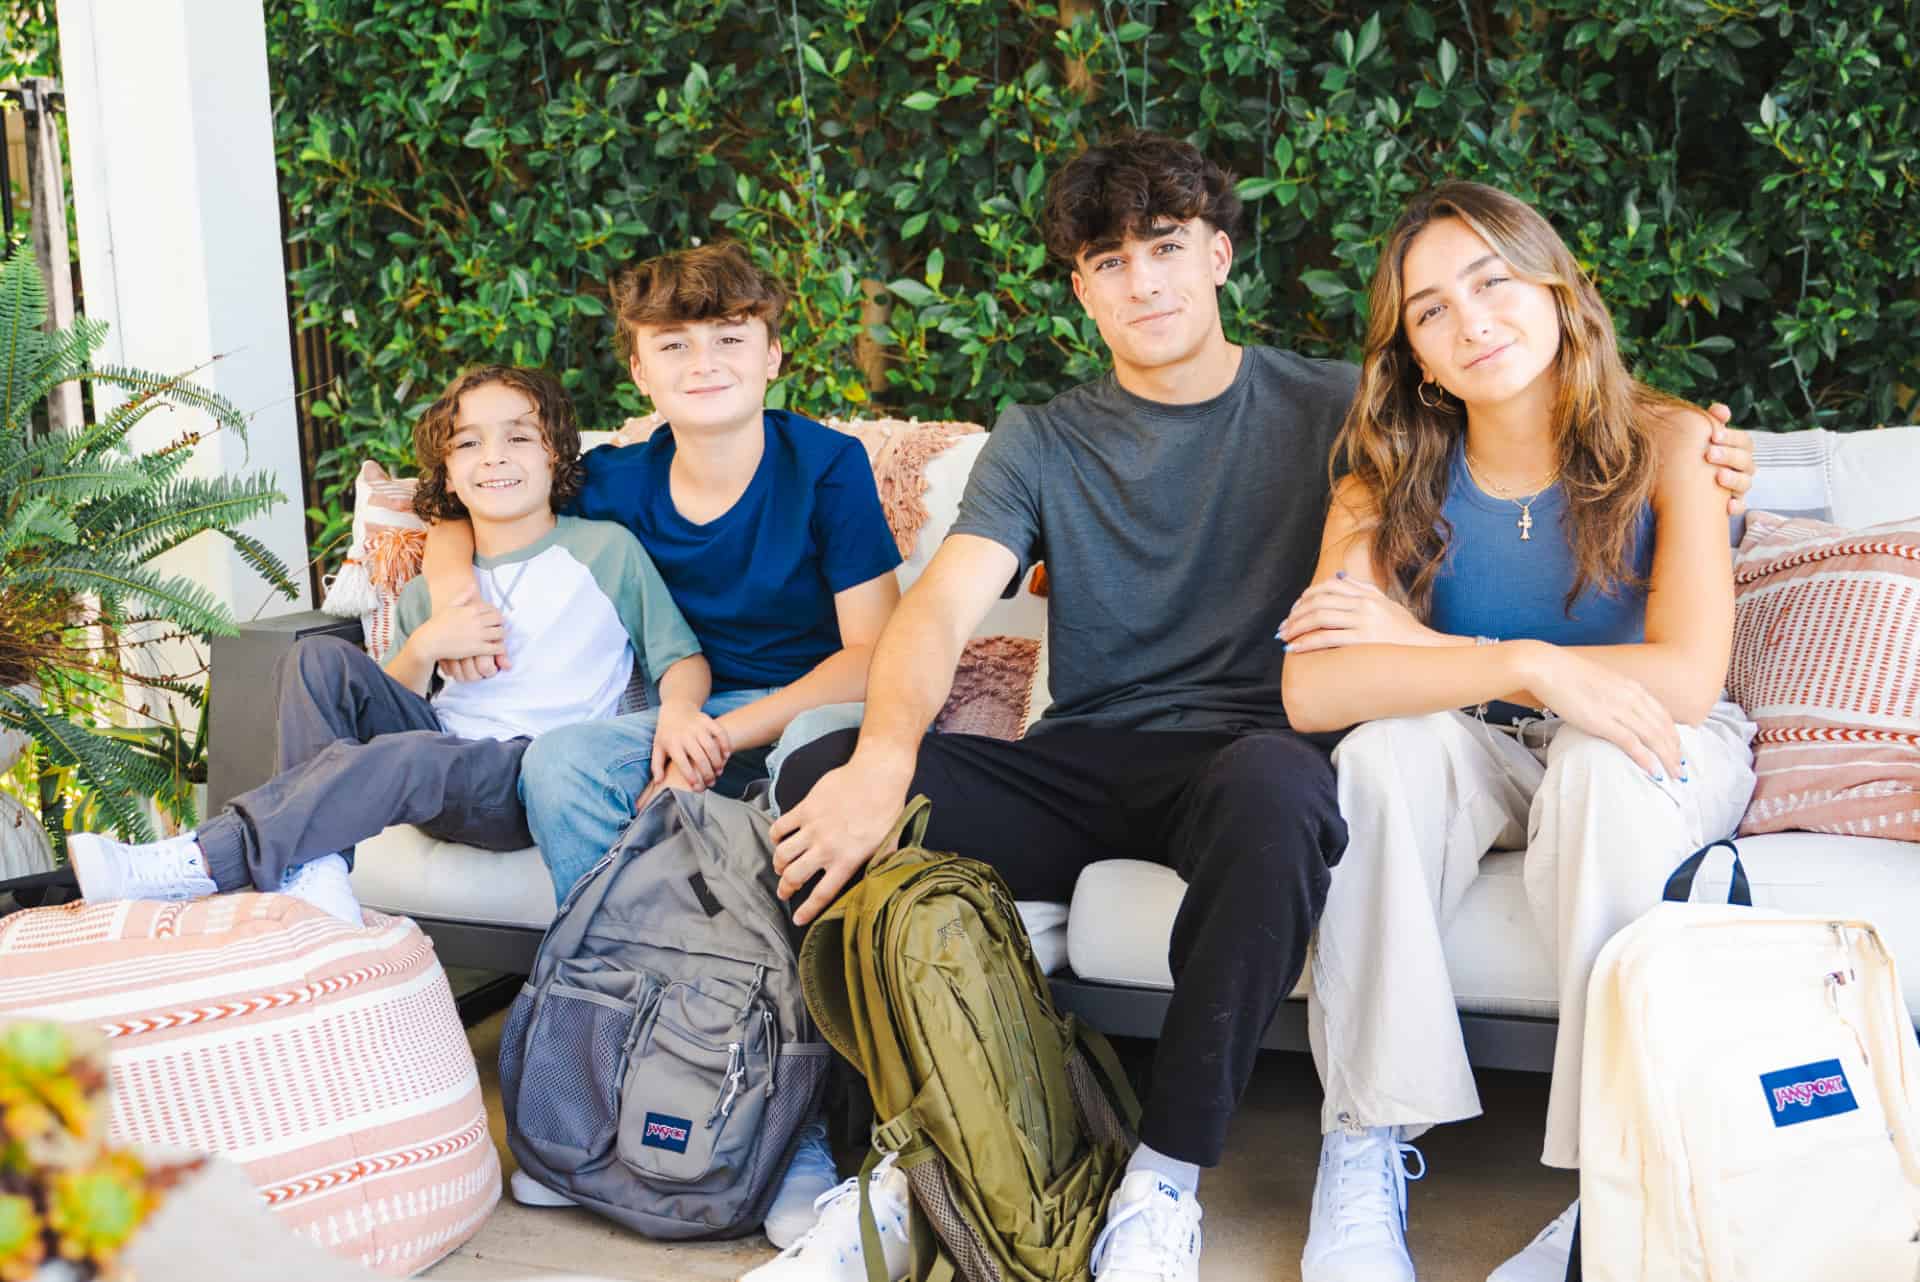 A family of 4 siblings. From left to right are a young boy, tween boy, teen boy and teen girl all wearing new back-to-school clothing trends from Kohl's.